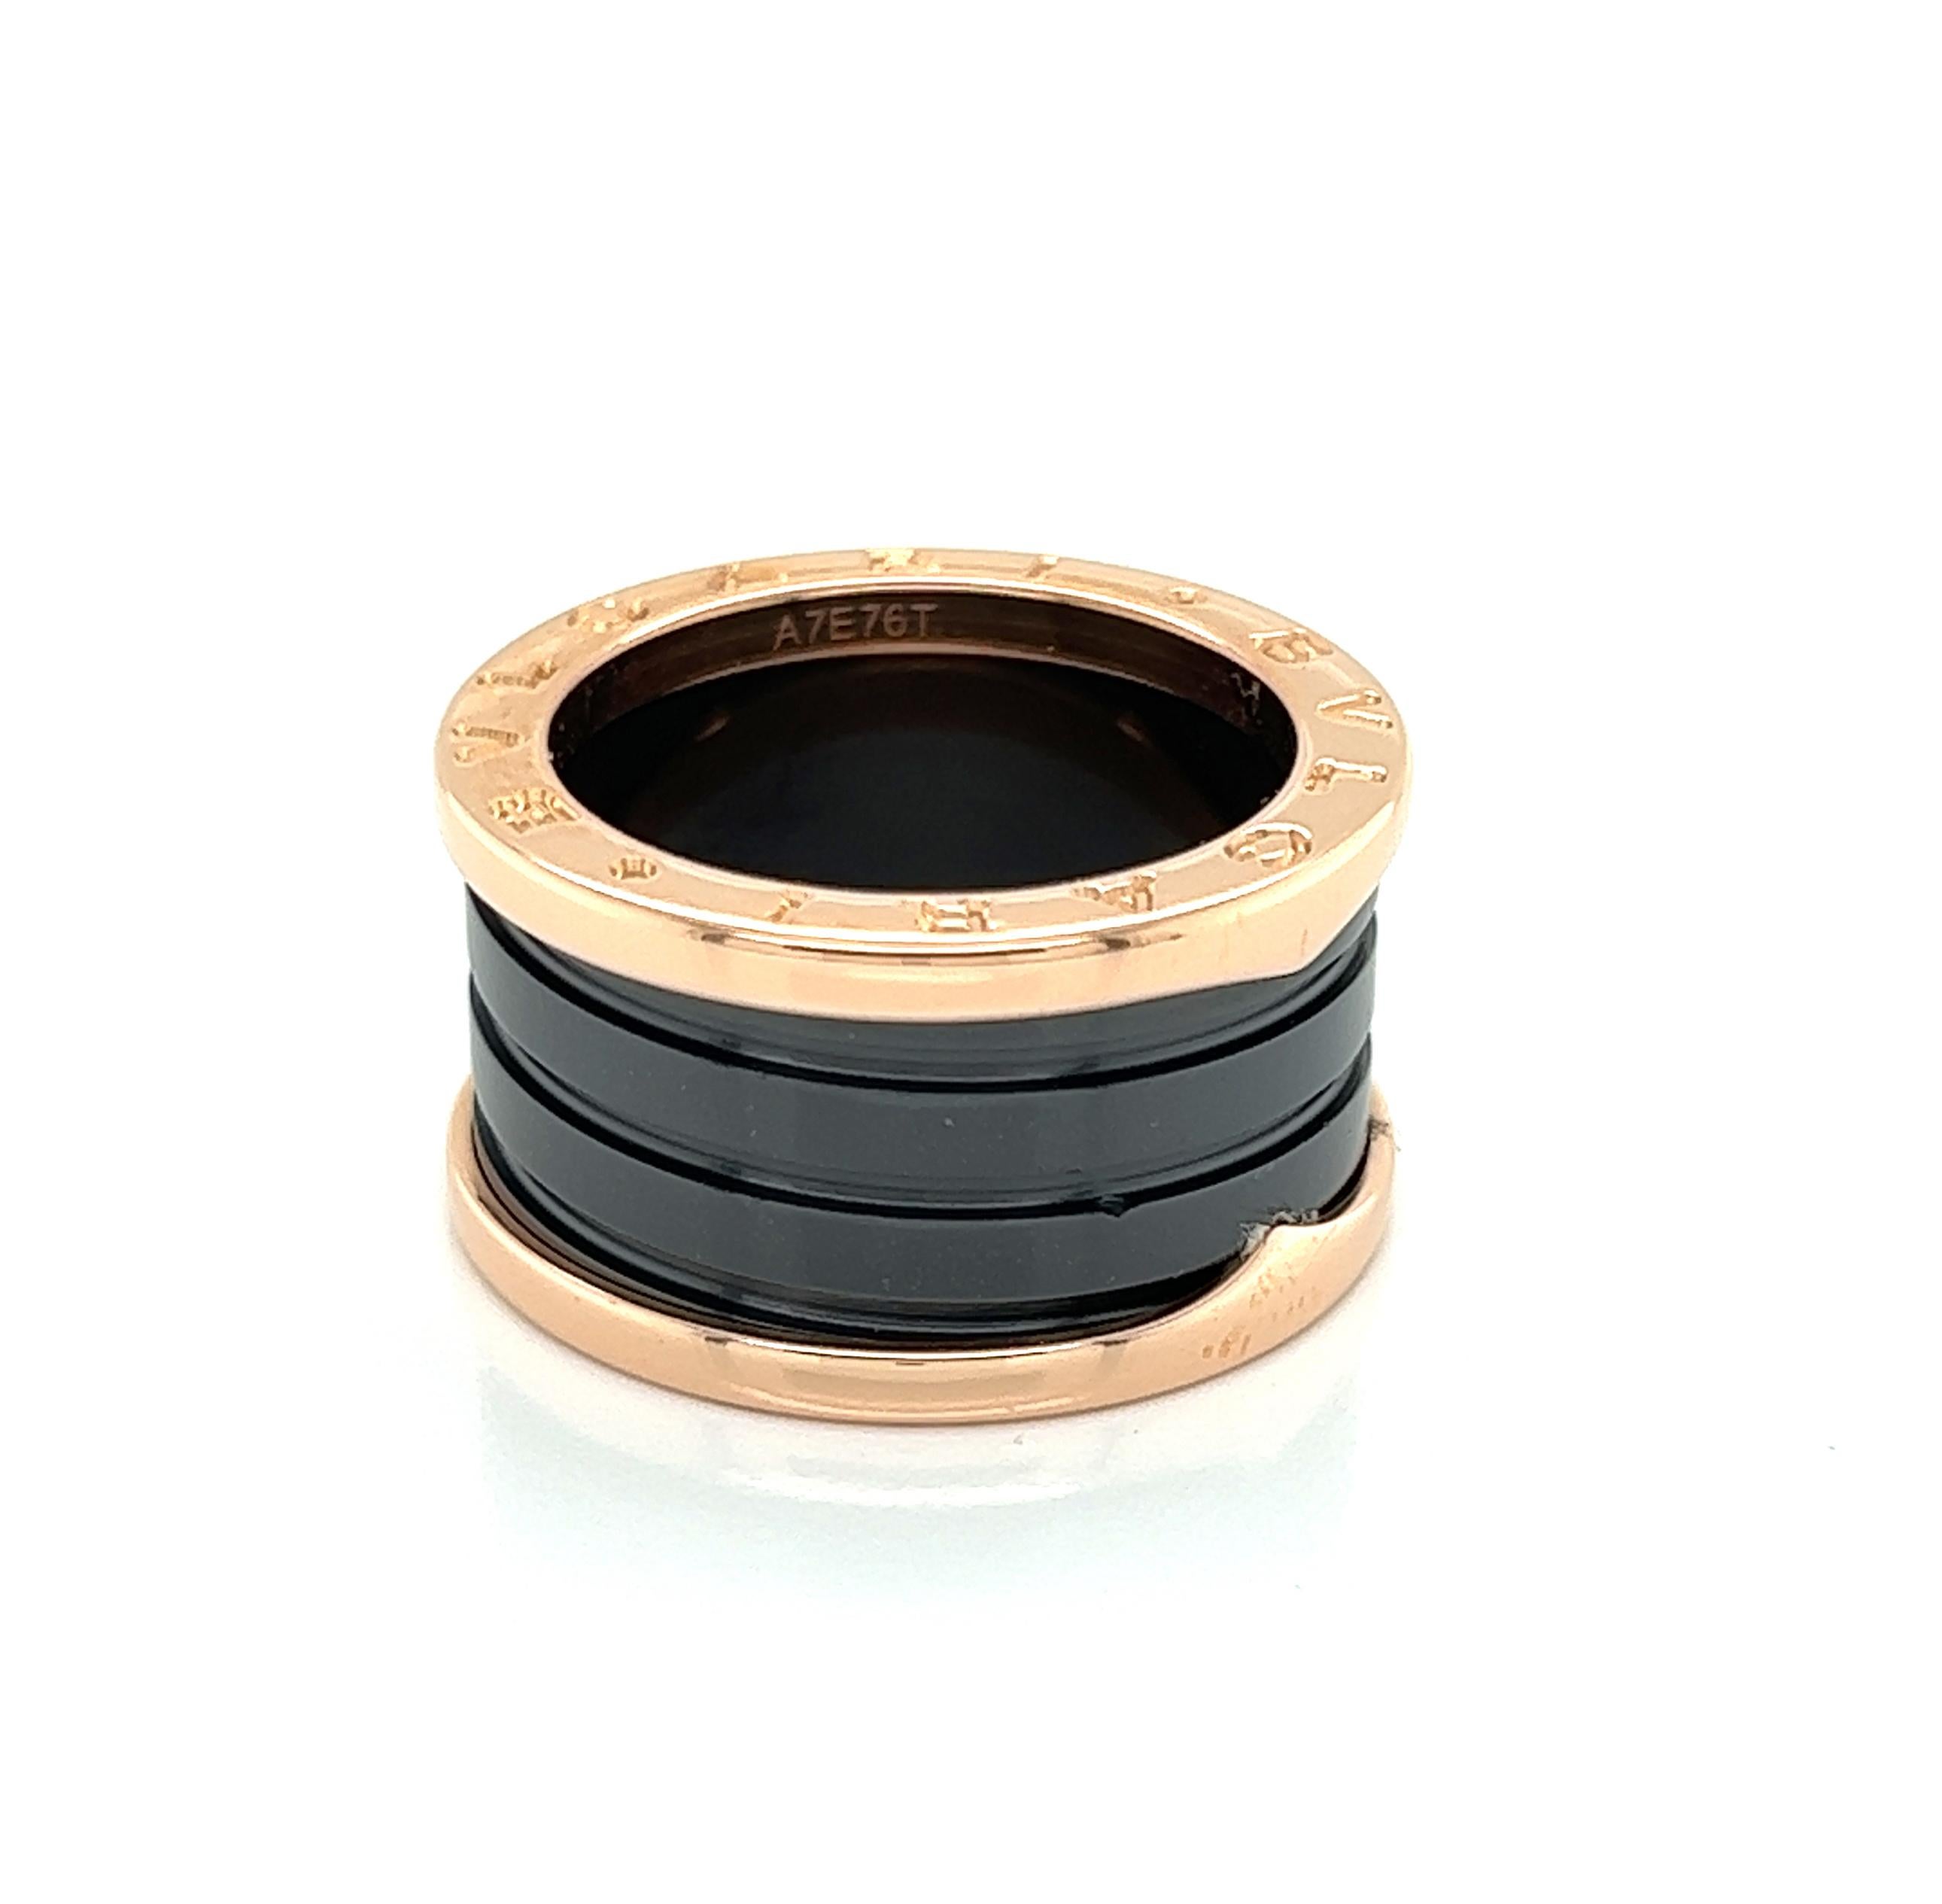 Authentic four band ring B.zero1 Collection is by Bvlgari with two 18k rose gold loops & a black ceramic spiral, featuring the flat sides of the band engraved BVLGARI.  The band is signed by the designer gold content and ring size with serial